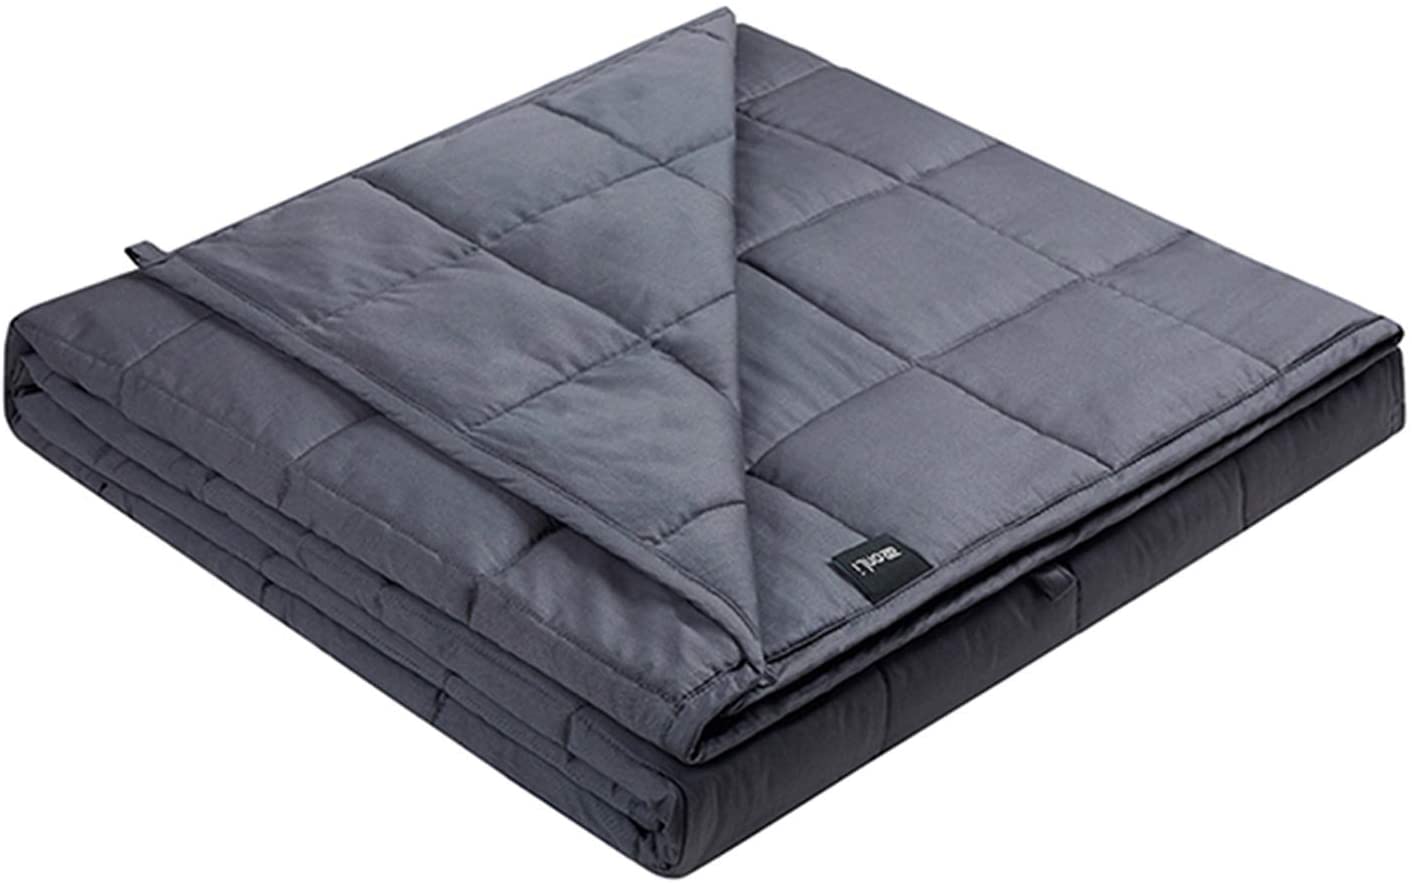 ZonLi Weighted Blanket 20 lbs, 60”x80”